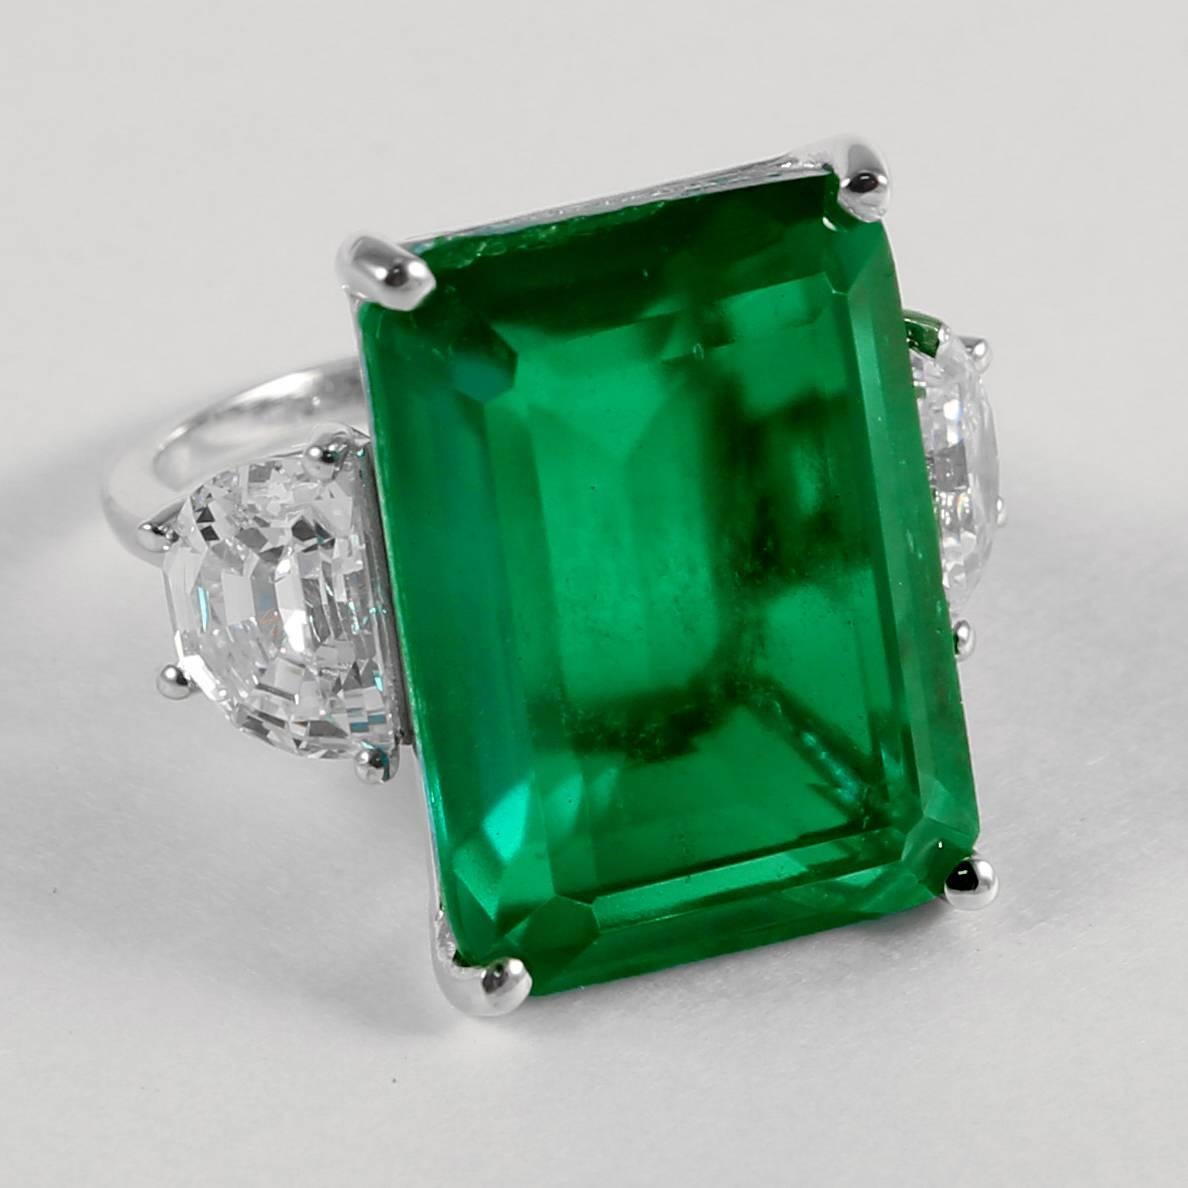 Magnificent faux 25 carat rectangular step cut emerald made of the finest green 
natural material faux emerald set with half moons either side in white gold. This ring has an amazing warm glow. Measures 1inch long and 3/4inch wide.
Free sizing.